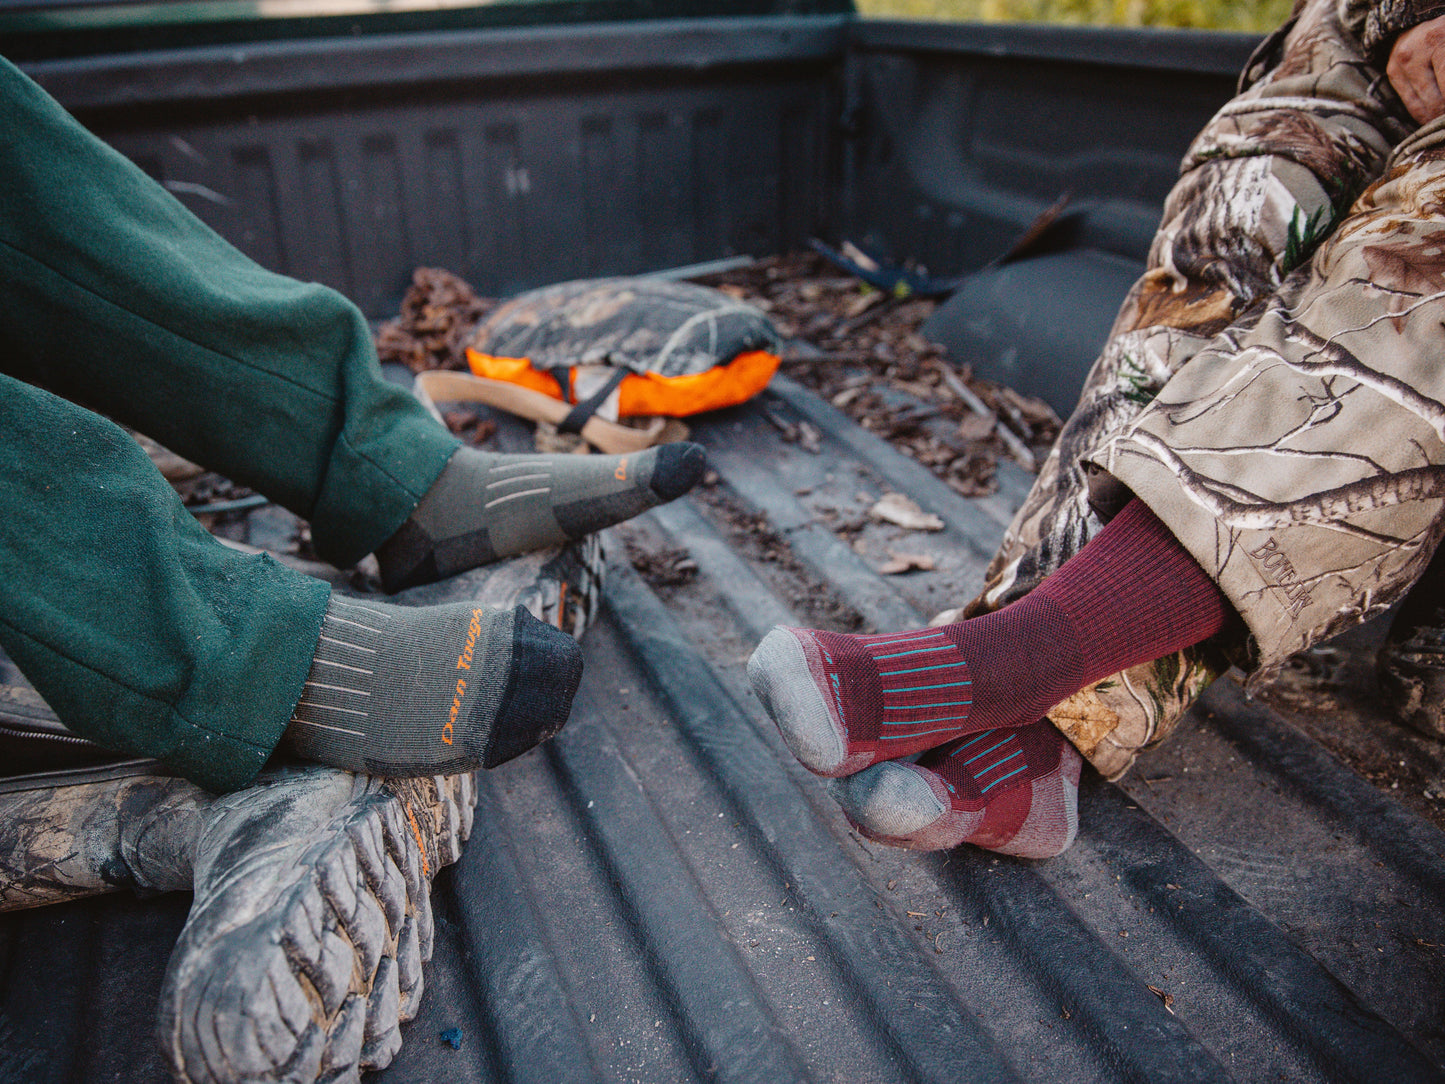 Darn Tough Women's and Men's Hunting socks on models sitting in bed of truck in hunting clothes